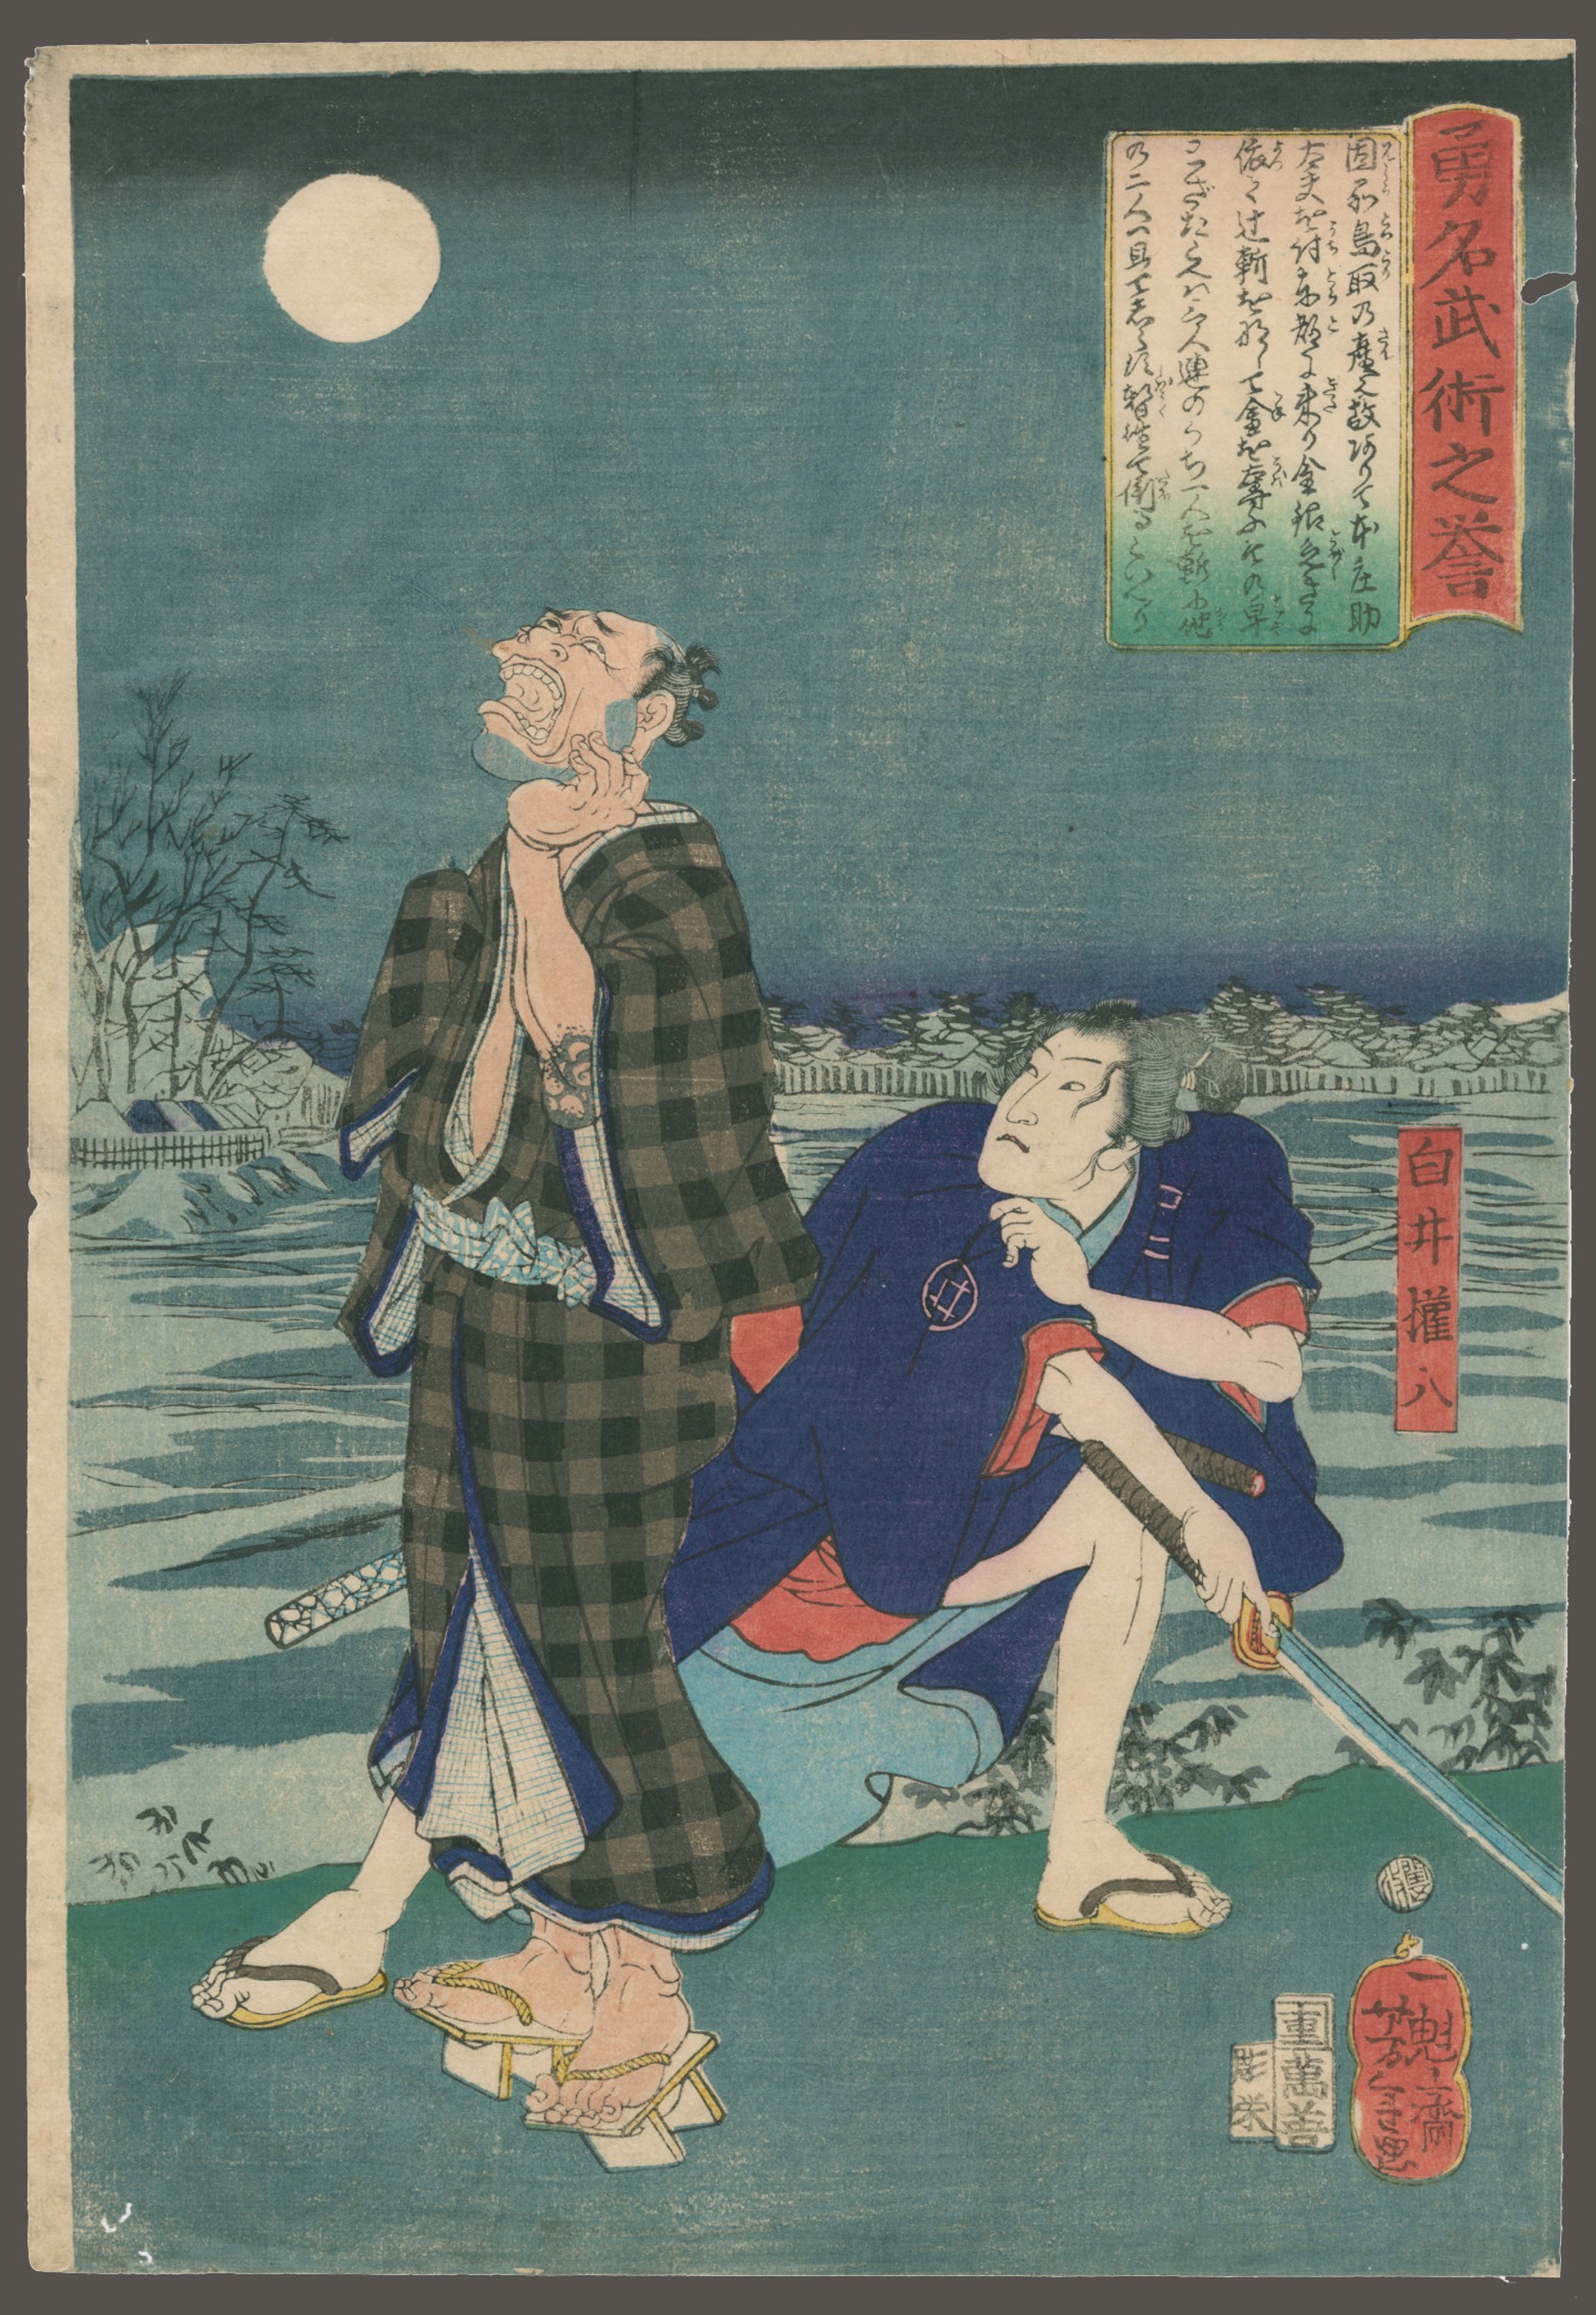 Shirai Gonpachi Sneaking up Behind an Opponent on a Moonlit Night Brave Masters of the Art of War by Yoshitoshi